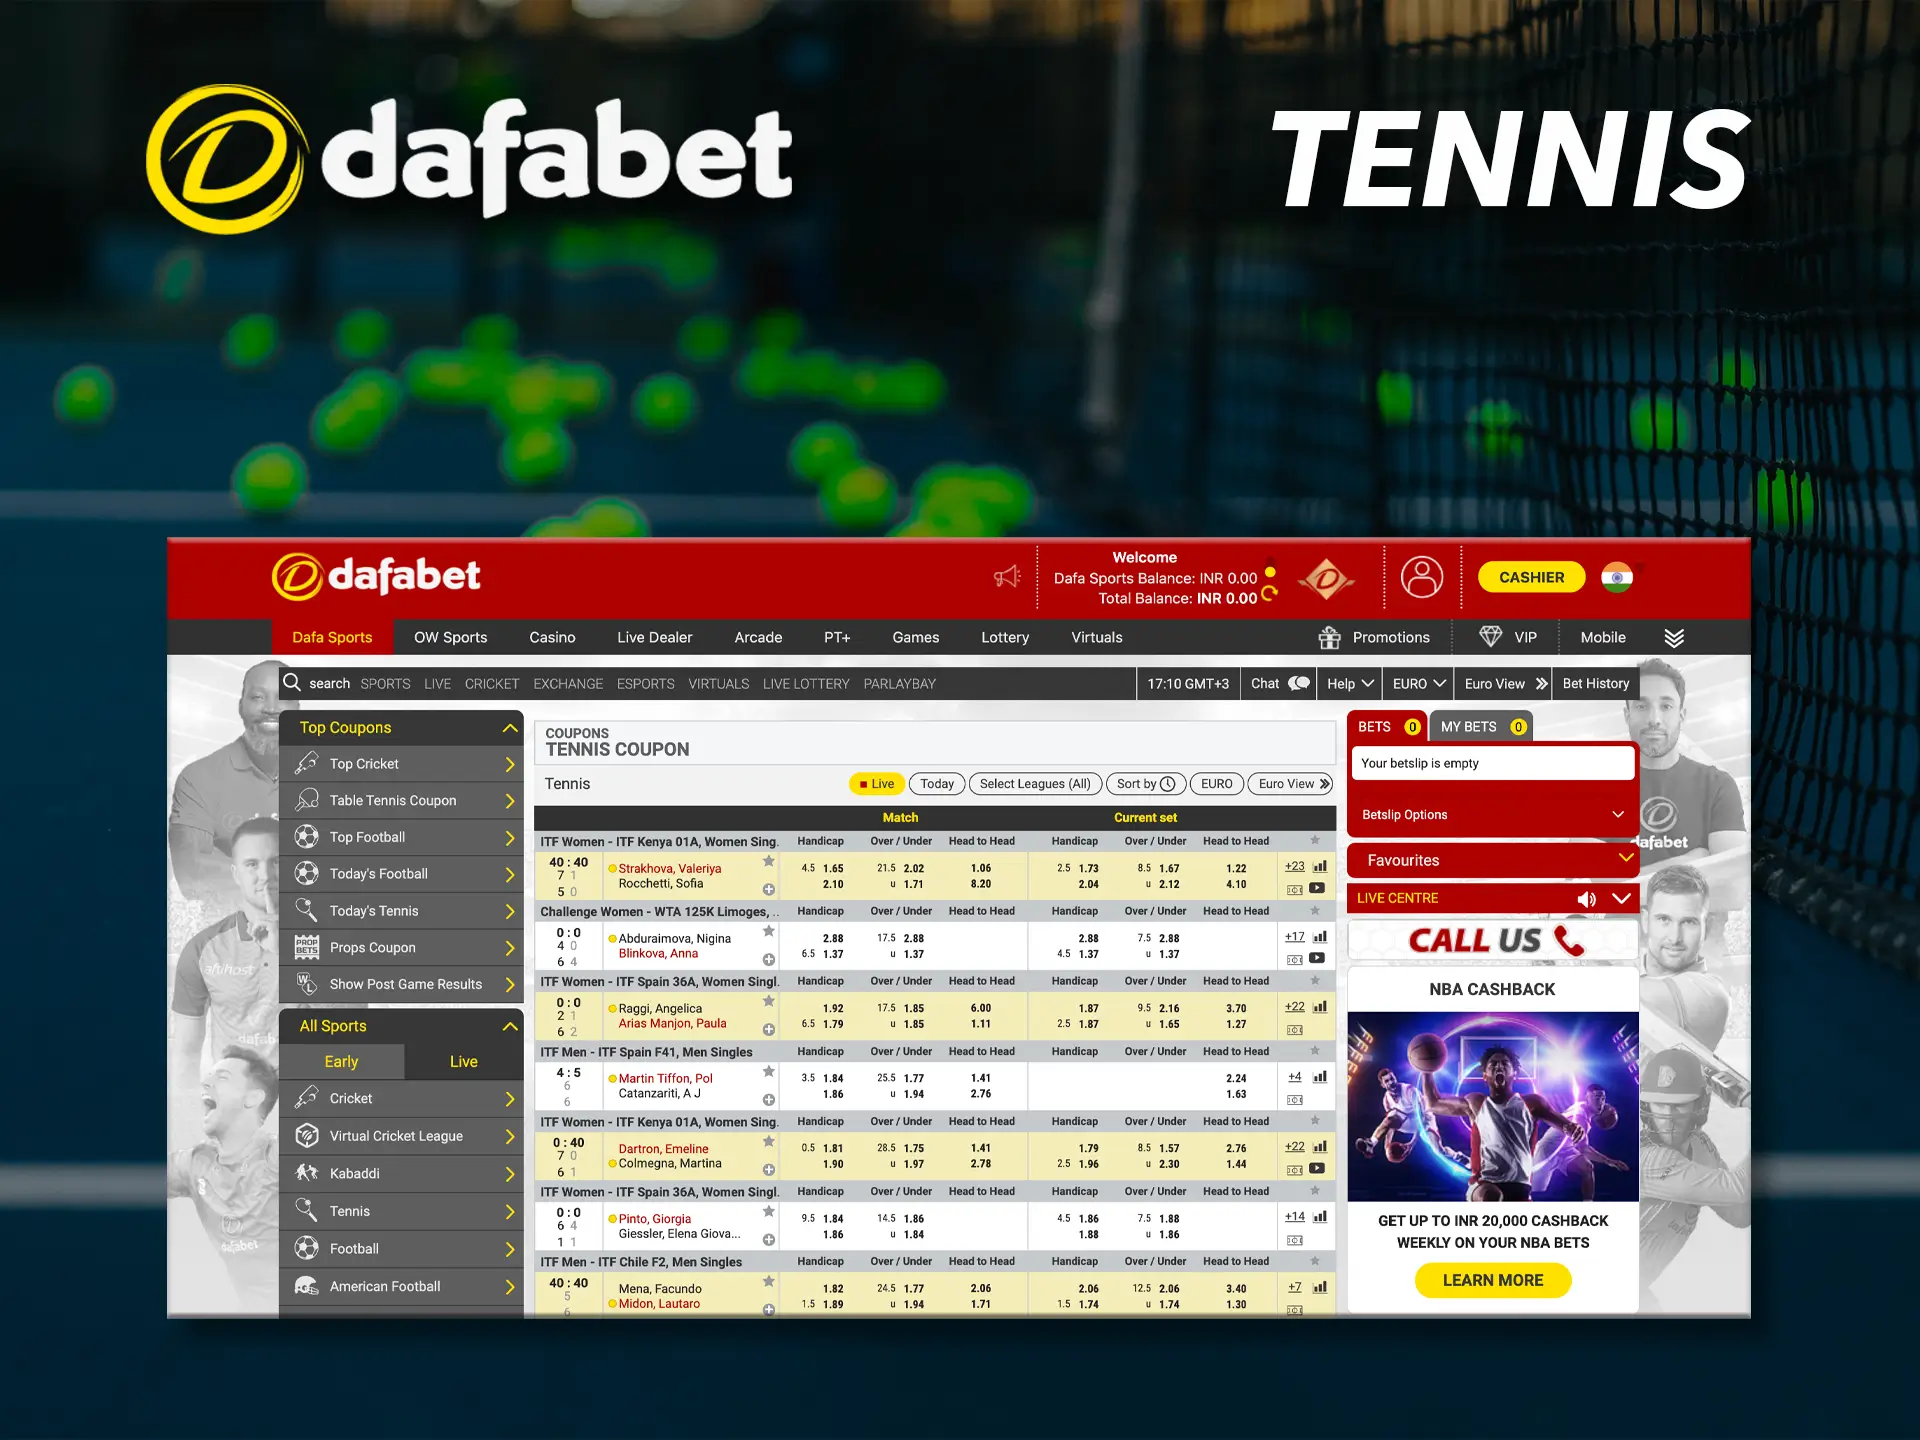 Dafabet offers its users bets on major tennis events.